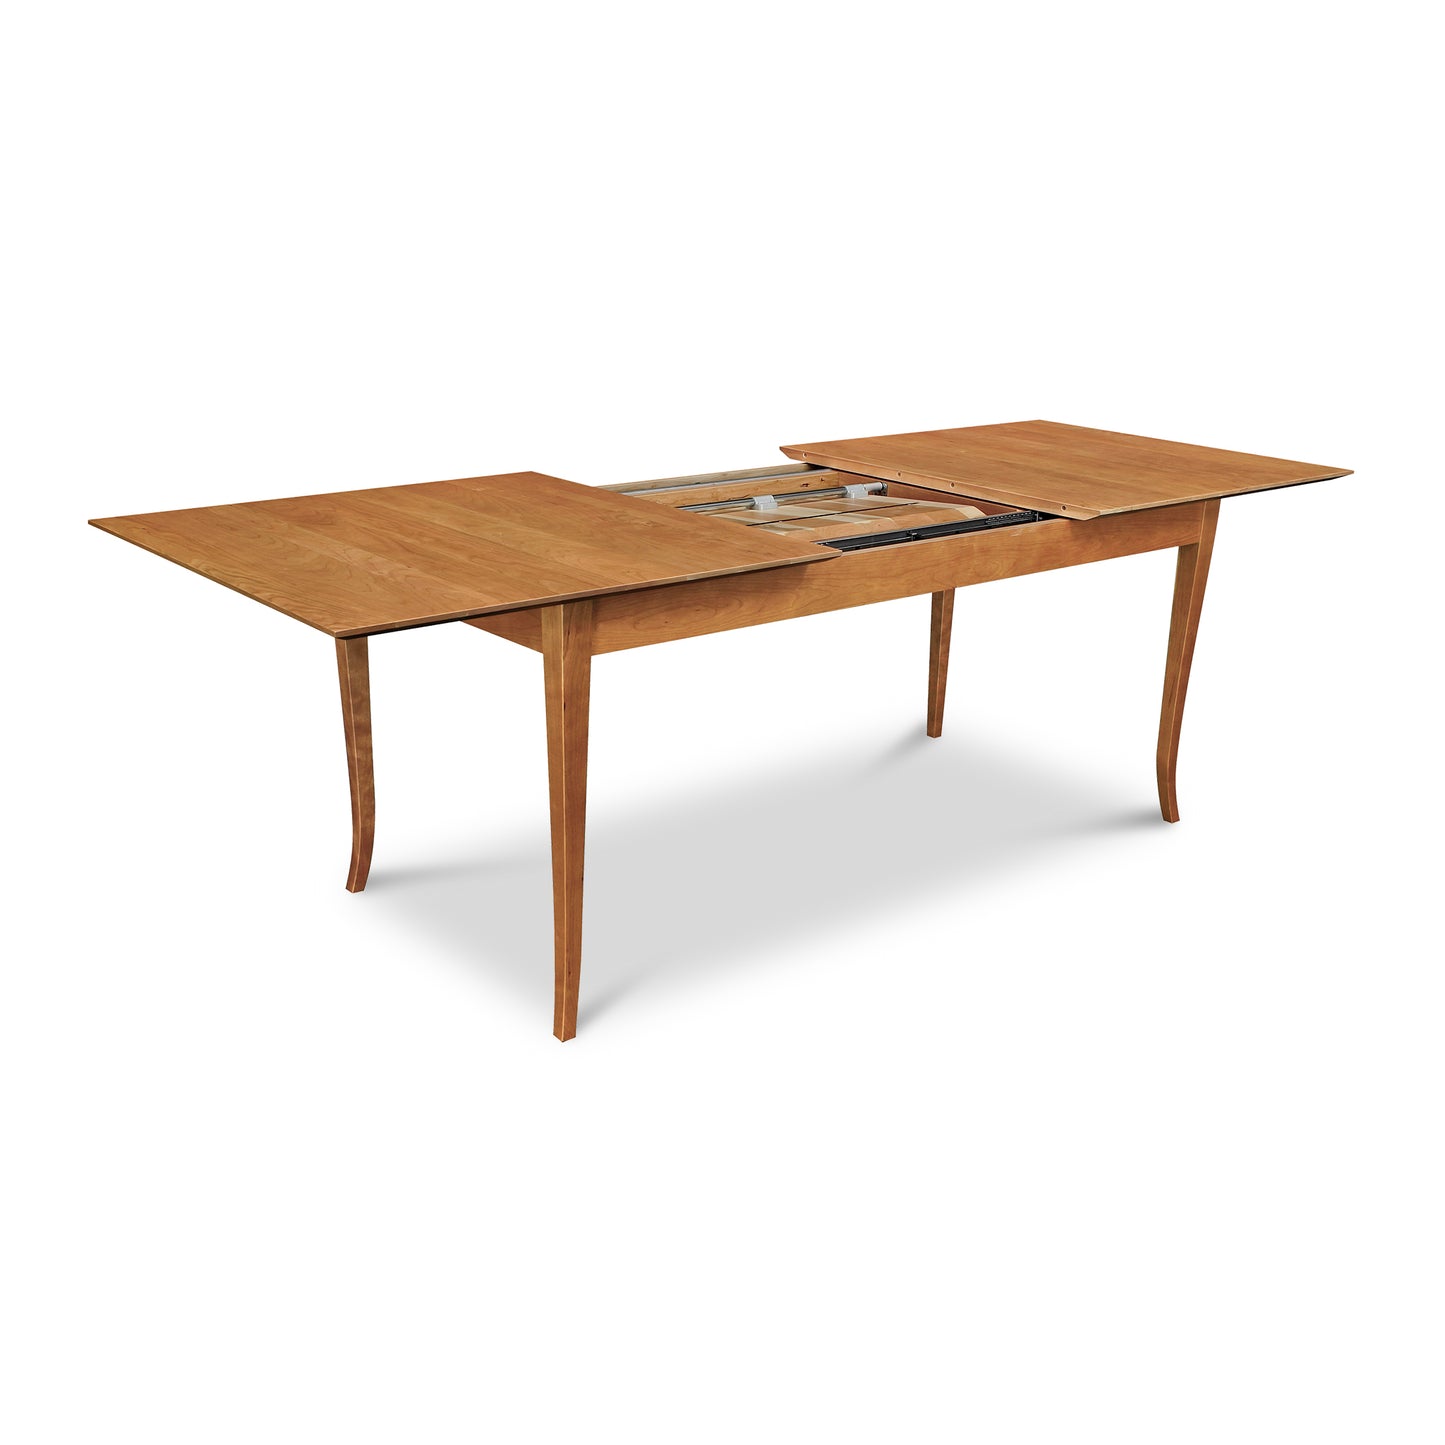 A Classic Shaker Flare Leg Butterfly Extension Table by Lyndon Furniture with flared legs and two drawers.